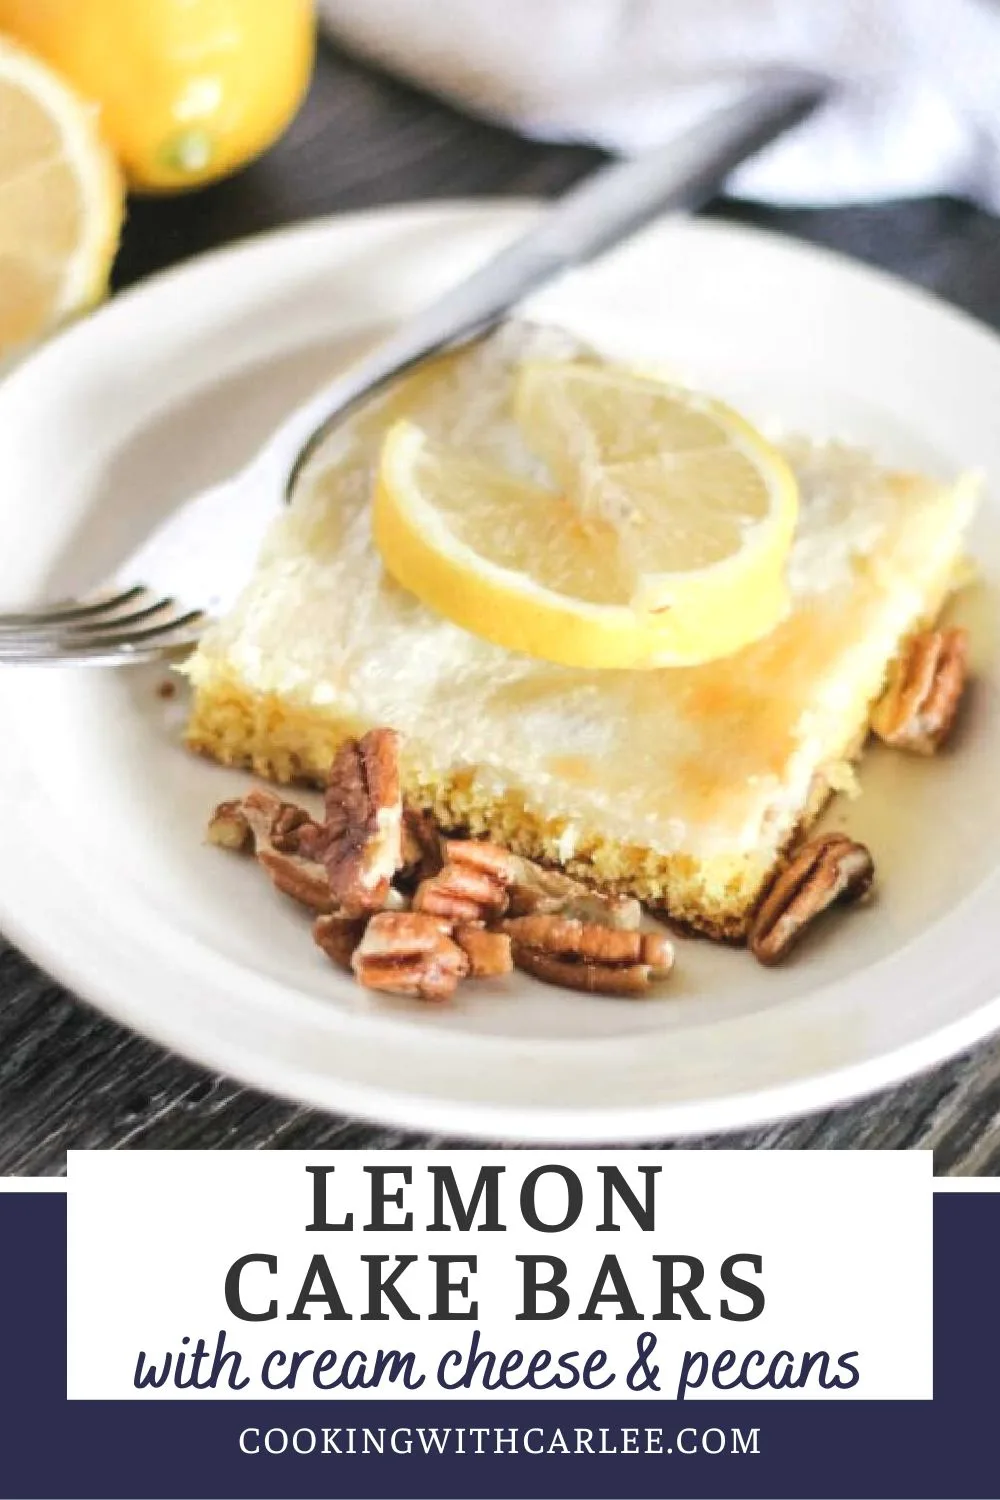 Luscious lemon, cream cheese and pecans come together in these easy to make dessert bars. They are quick and fabulous!